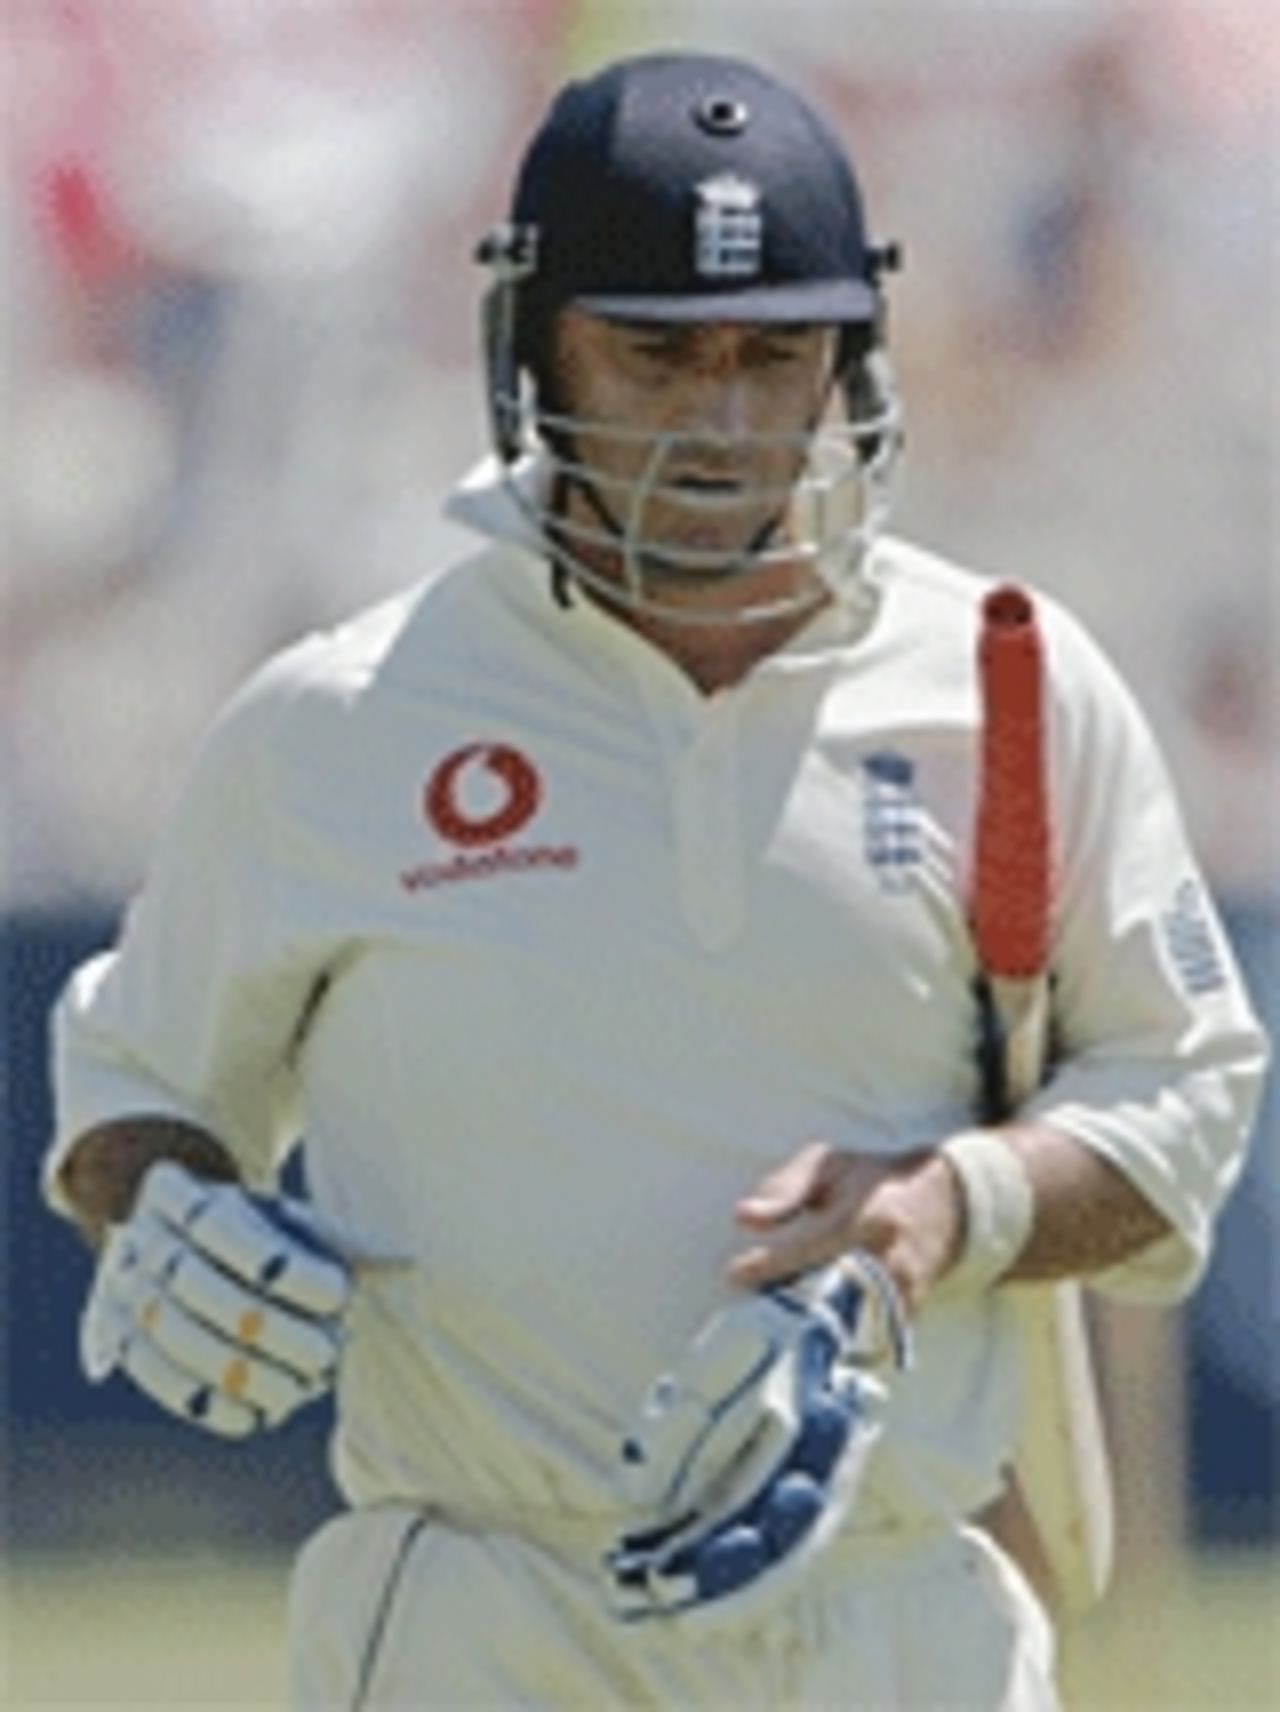 Graham Thorpe walks off after being dismissed early on the fifth day, South Africa v England, Cape Town, 3rd Test, January 6, 2005